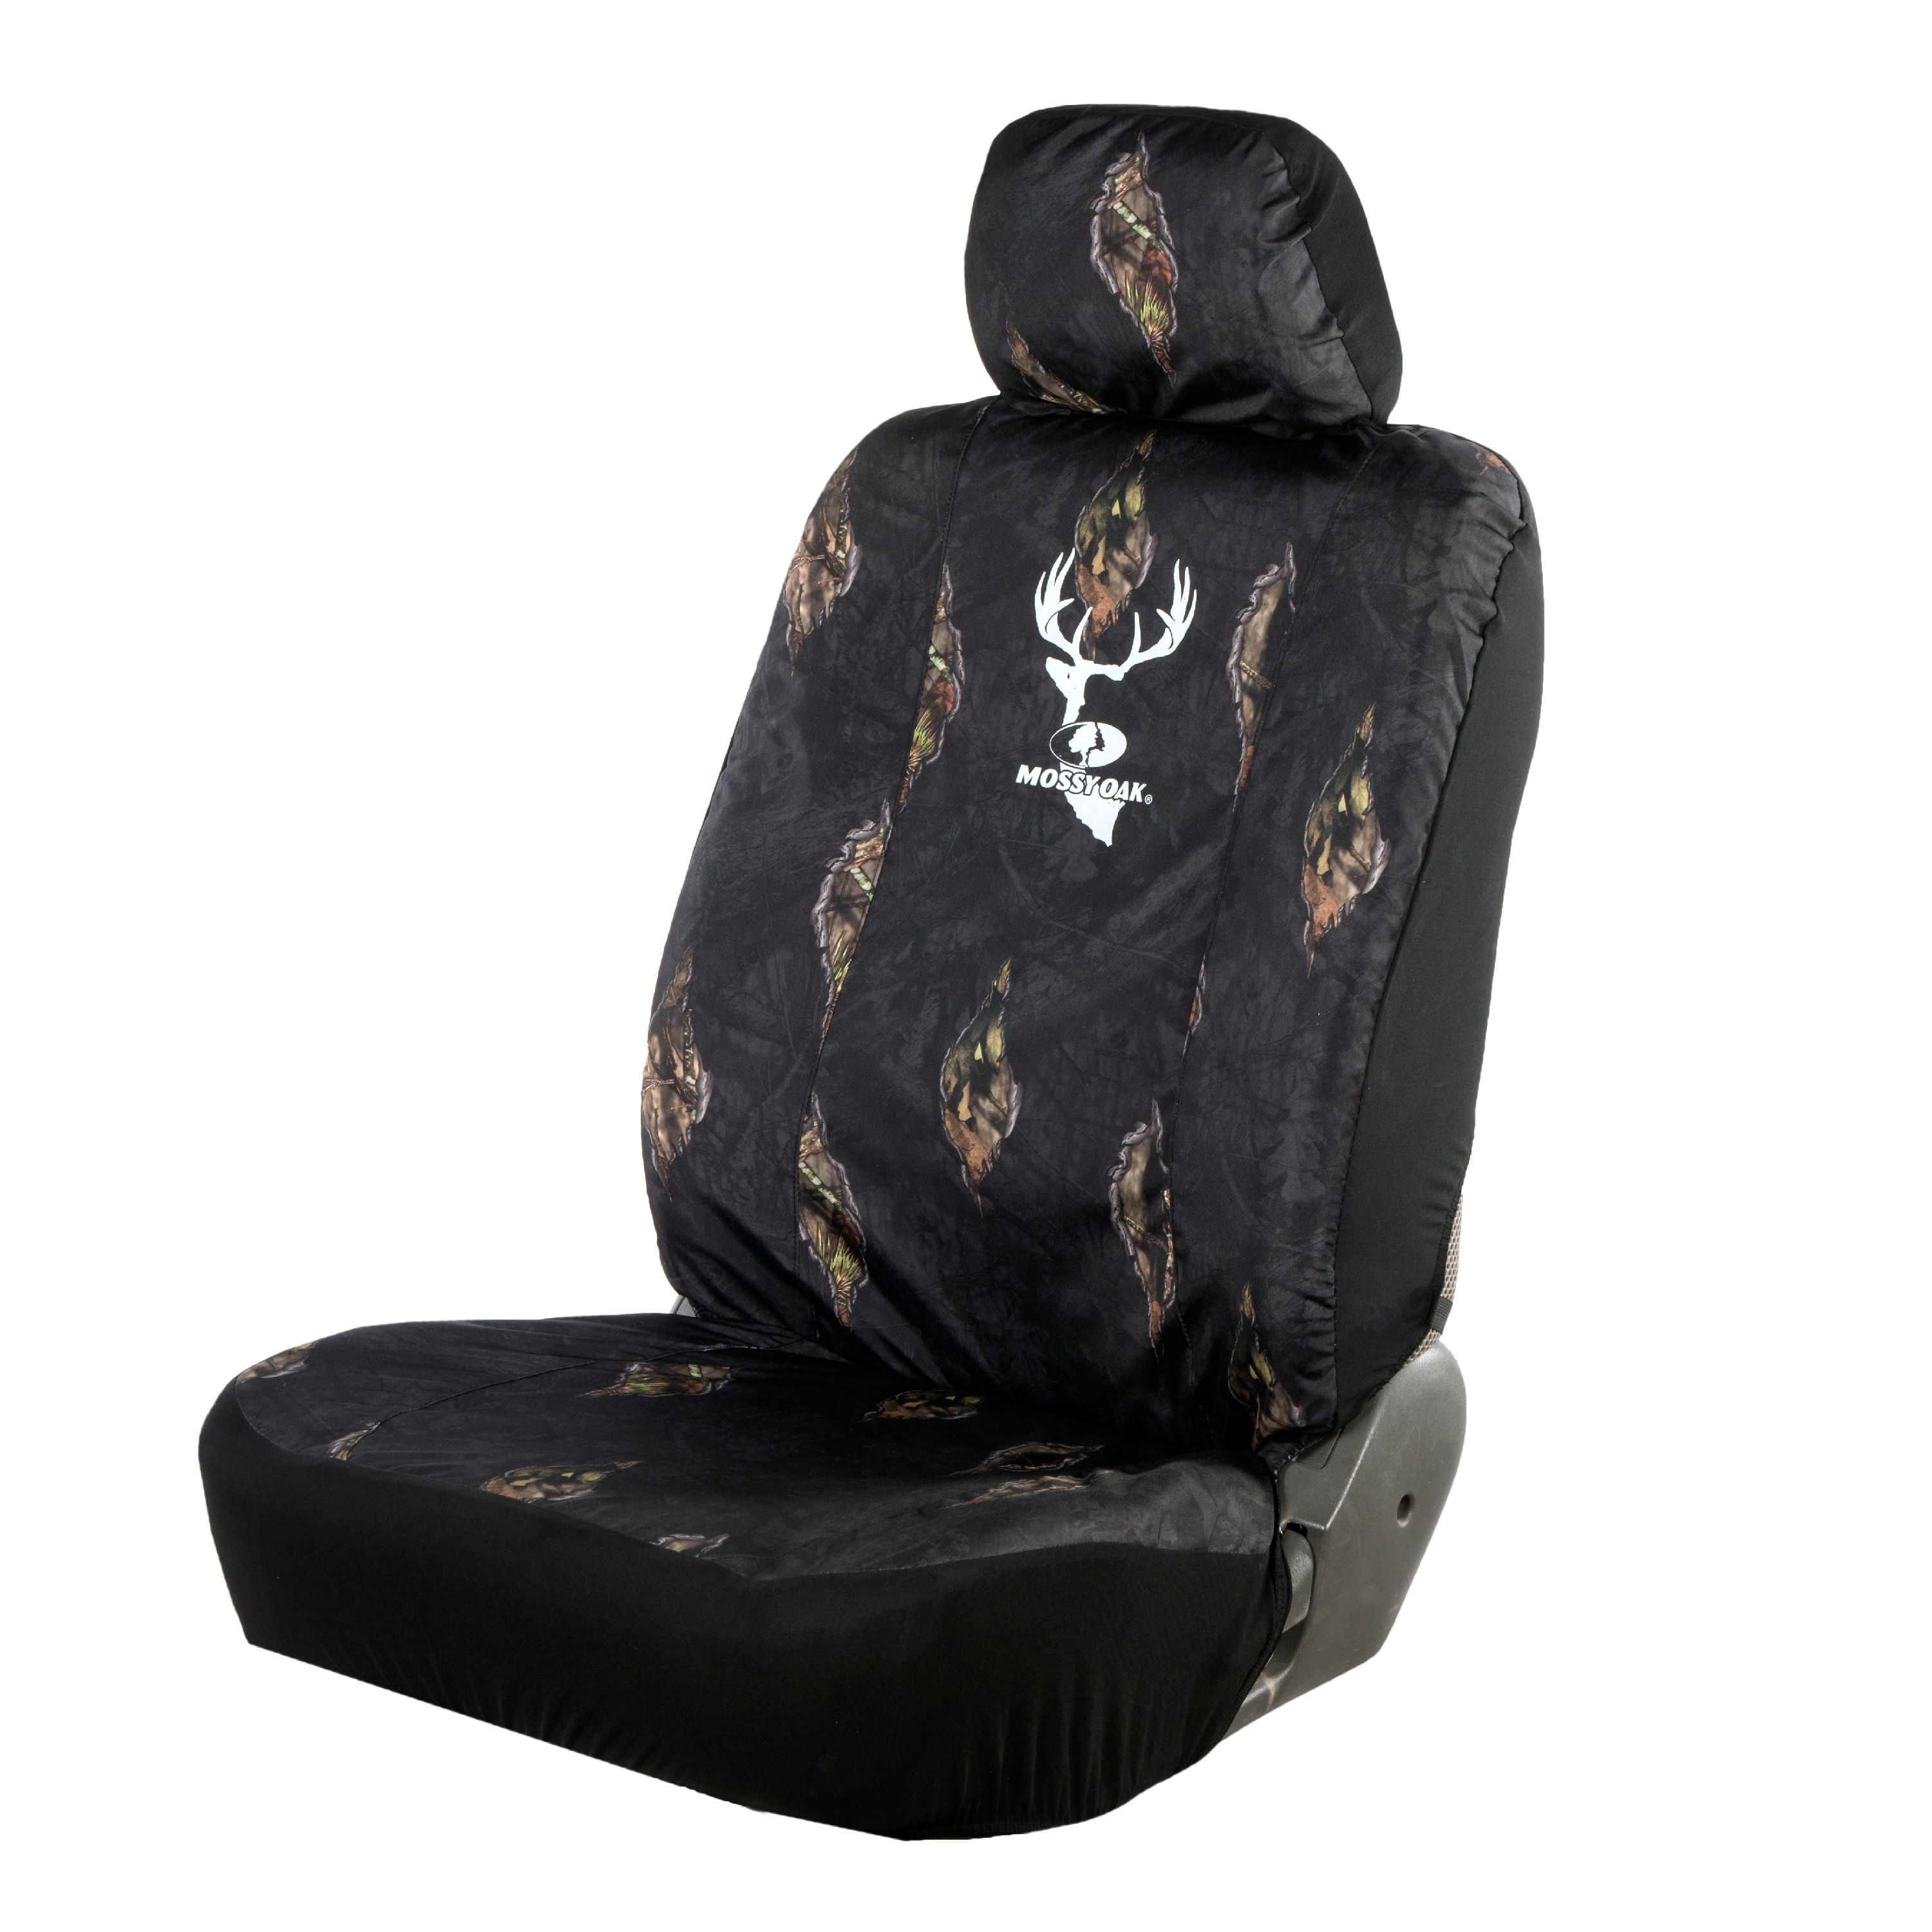 infant car seat cover and hood cover Mossy oak camo